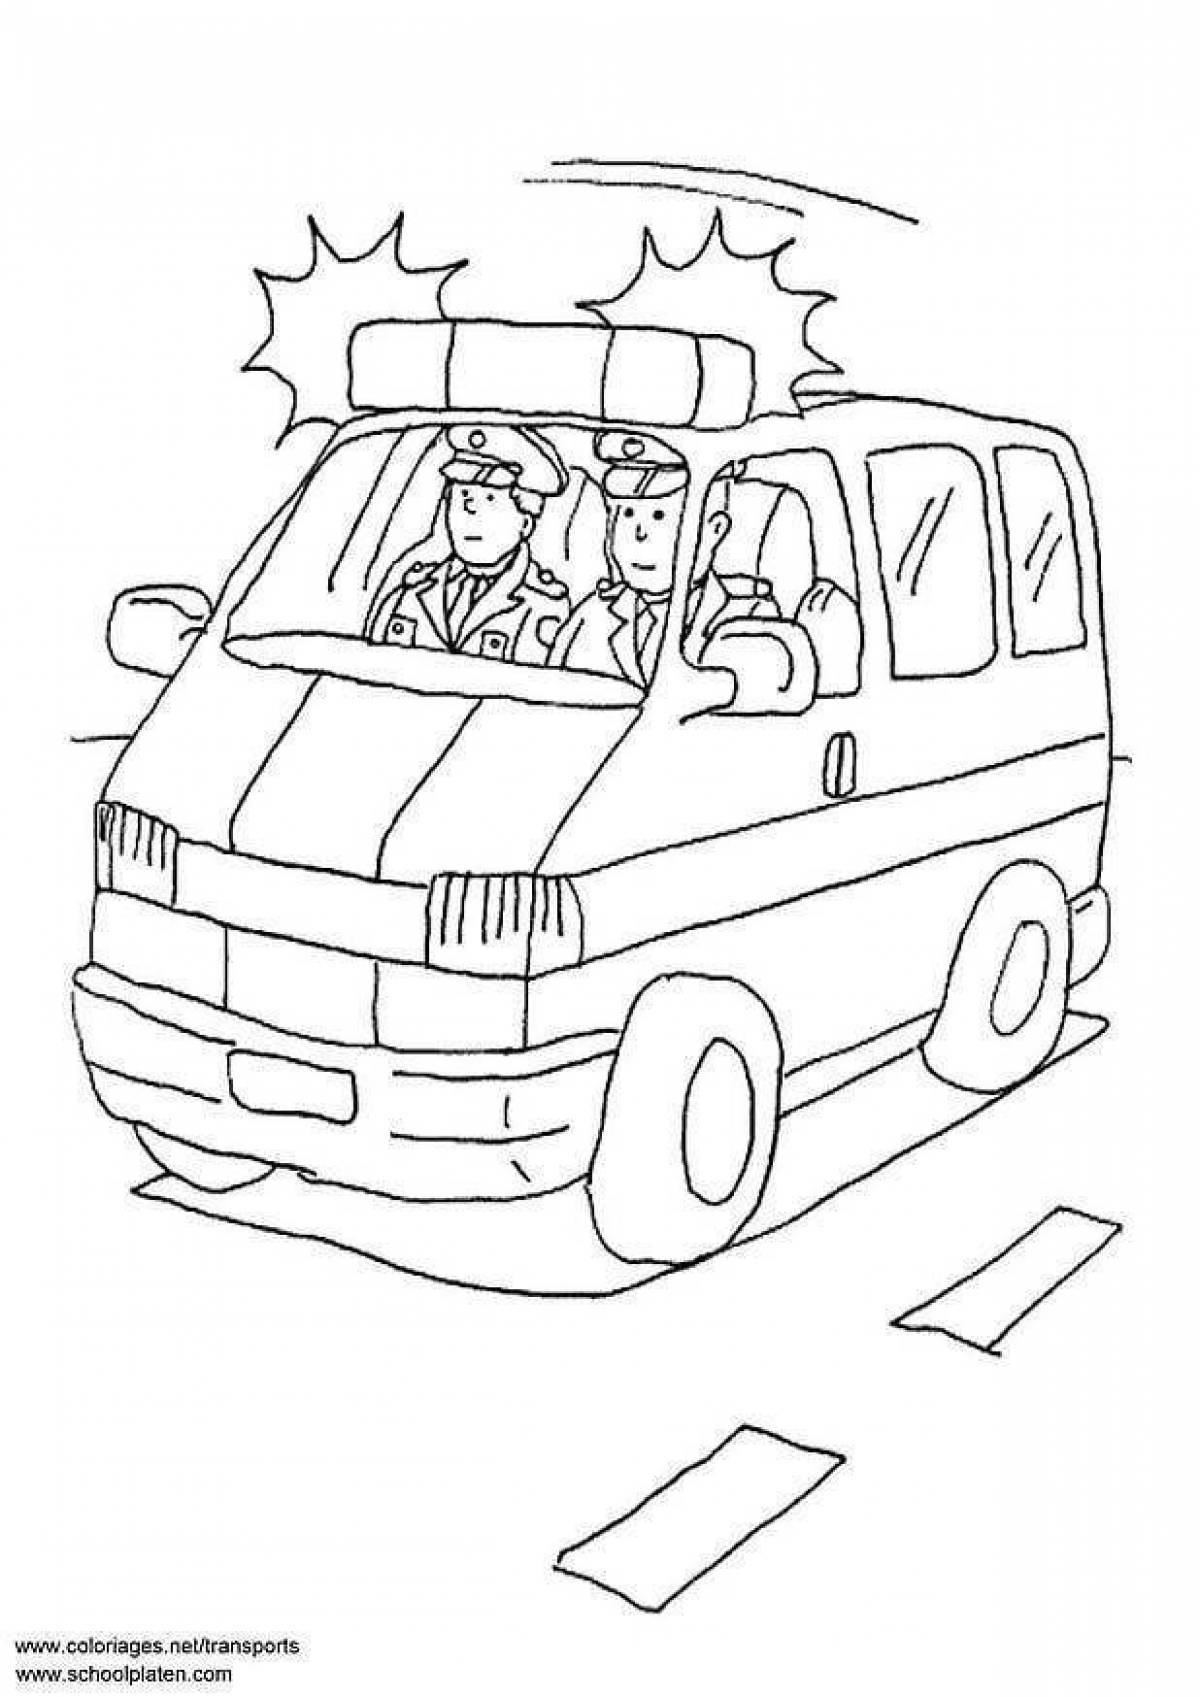 Coloring page wonderful police bus